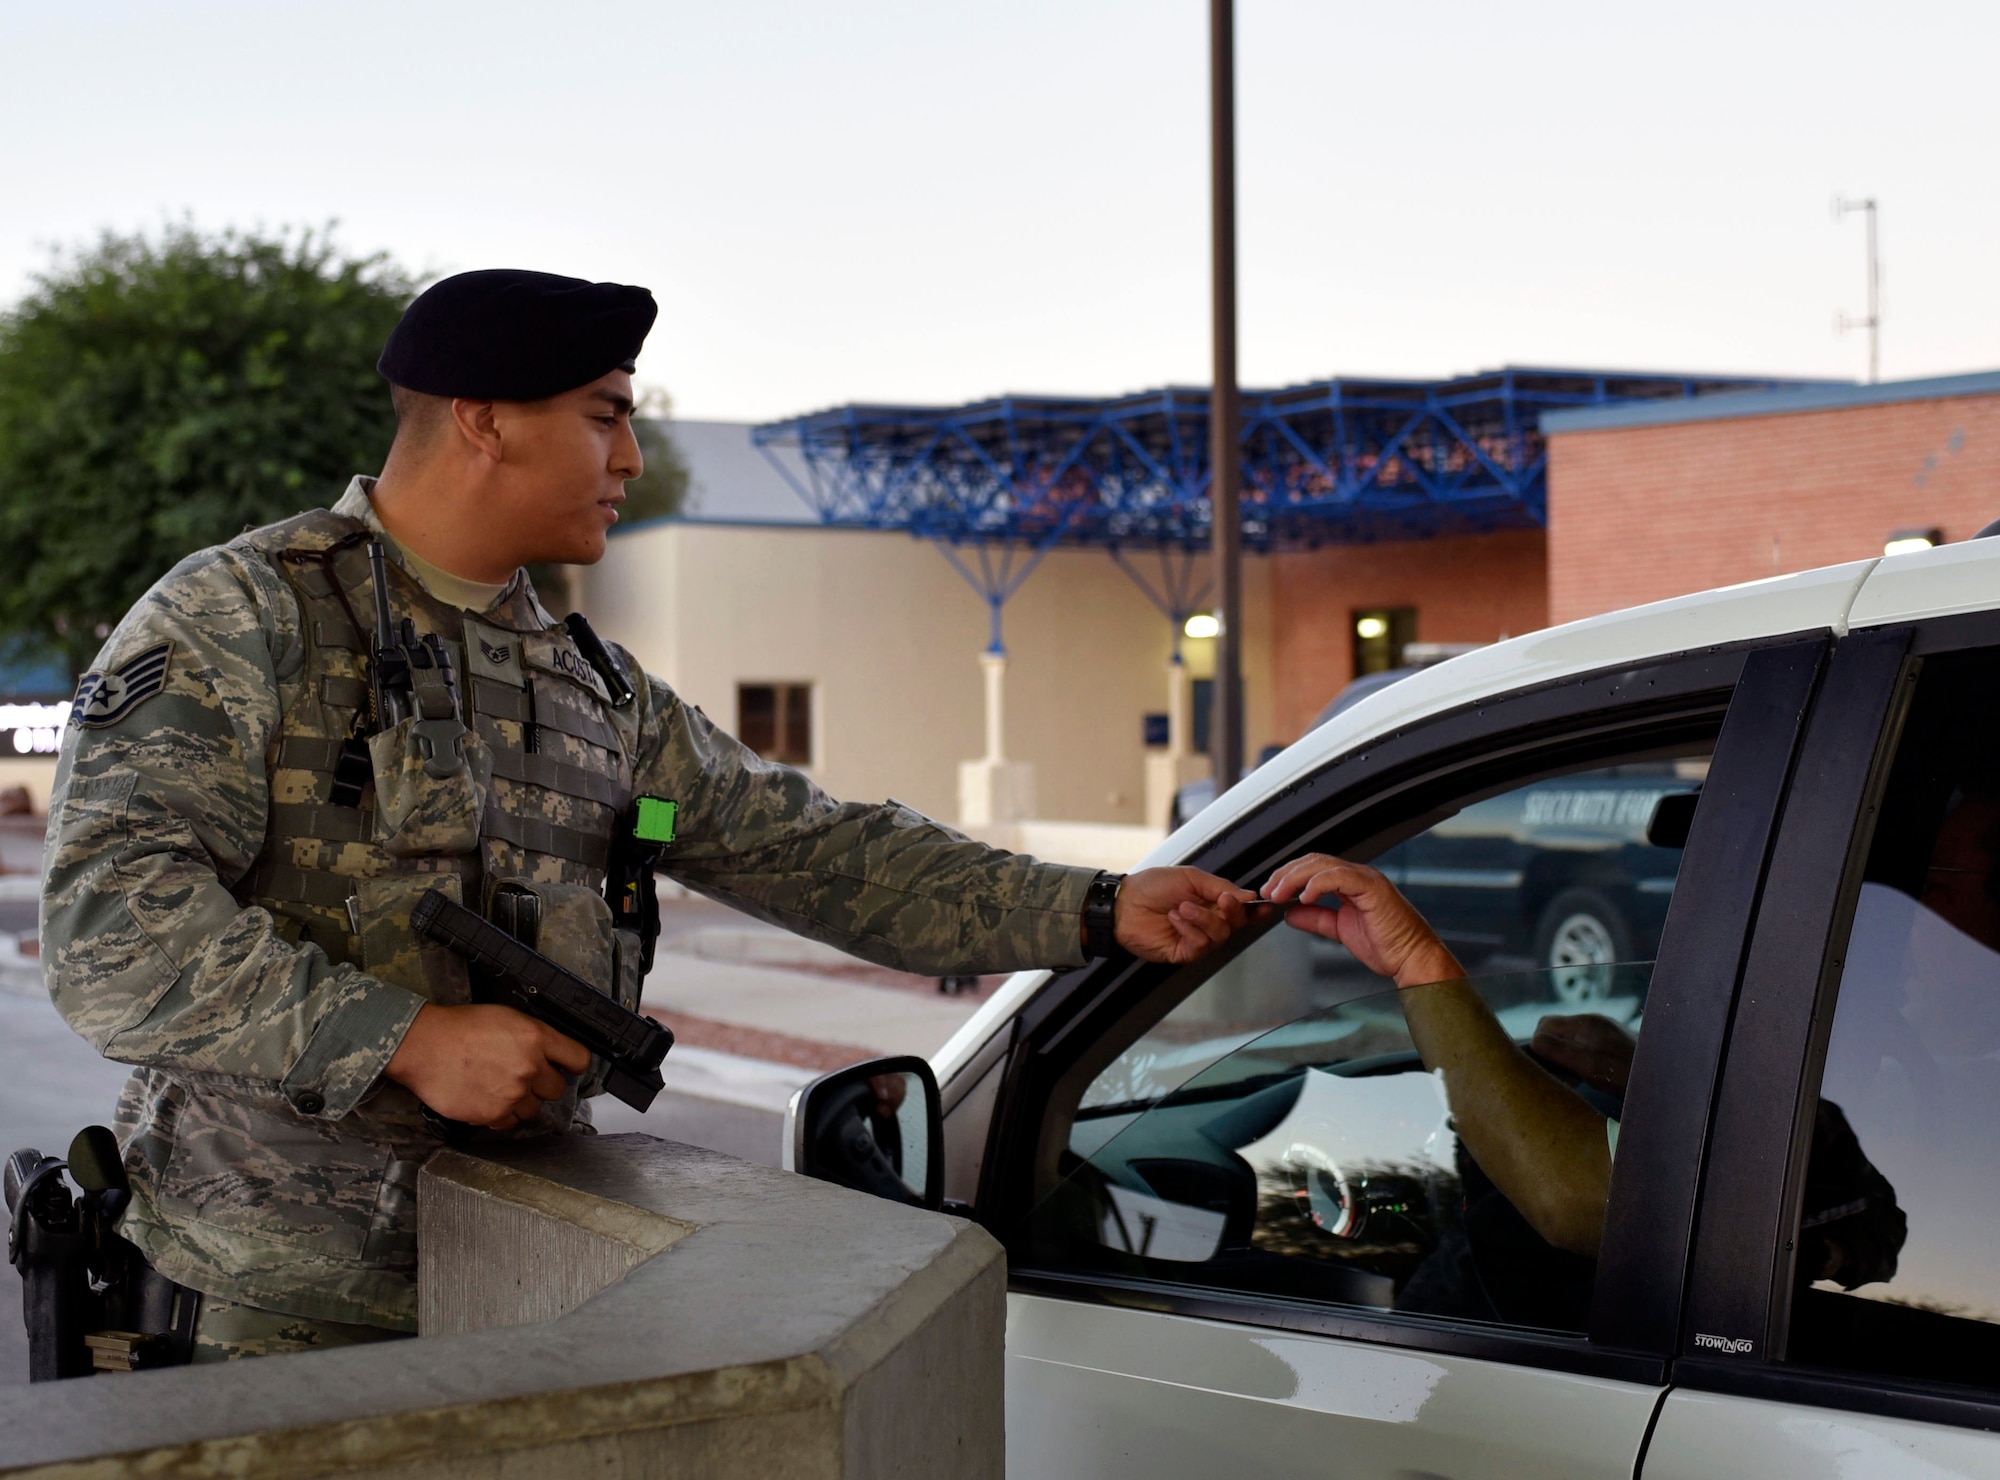 Air Force Staff Sgt. Rodrigo Acosta, a security forces specialist with the Arizona Air National Guard's 162nd Wing, conducts an identification check at Tucson Air National Guard Base in Tucson, Arizona, Sept. 8, 2018. When not wearing an Air Force uniform as a security forces specialist, Acosta serves as a police officer for the Tucson Police Department. "Both jobs have the same mindset when it comes to teamwork and building trust among your comrades," he said.